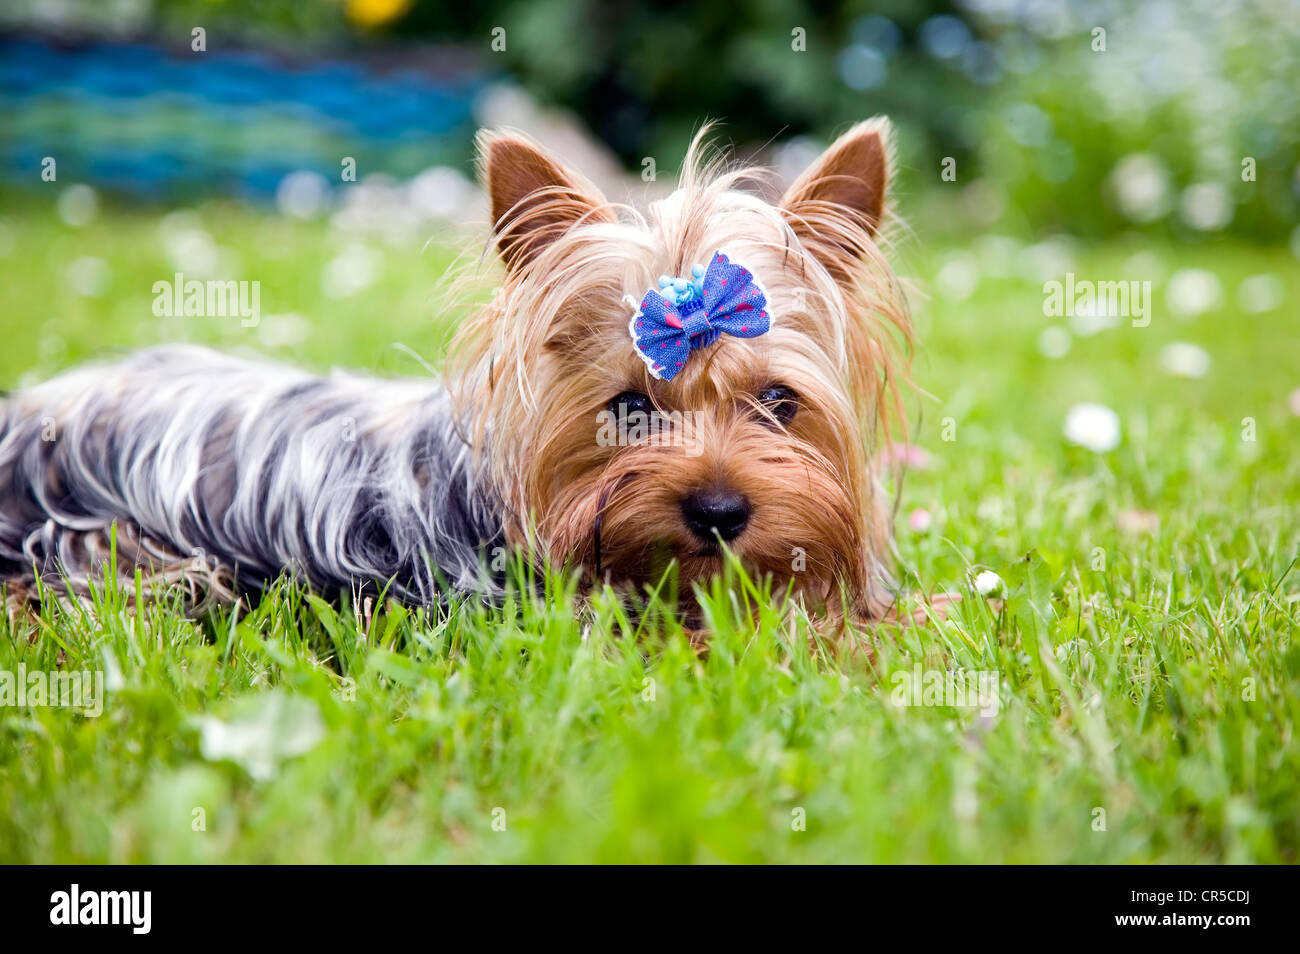 Beautiful yorkshire terrier dog with blue ribbon Stock Photo